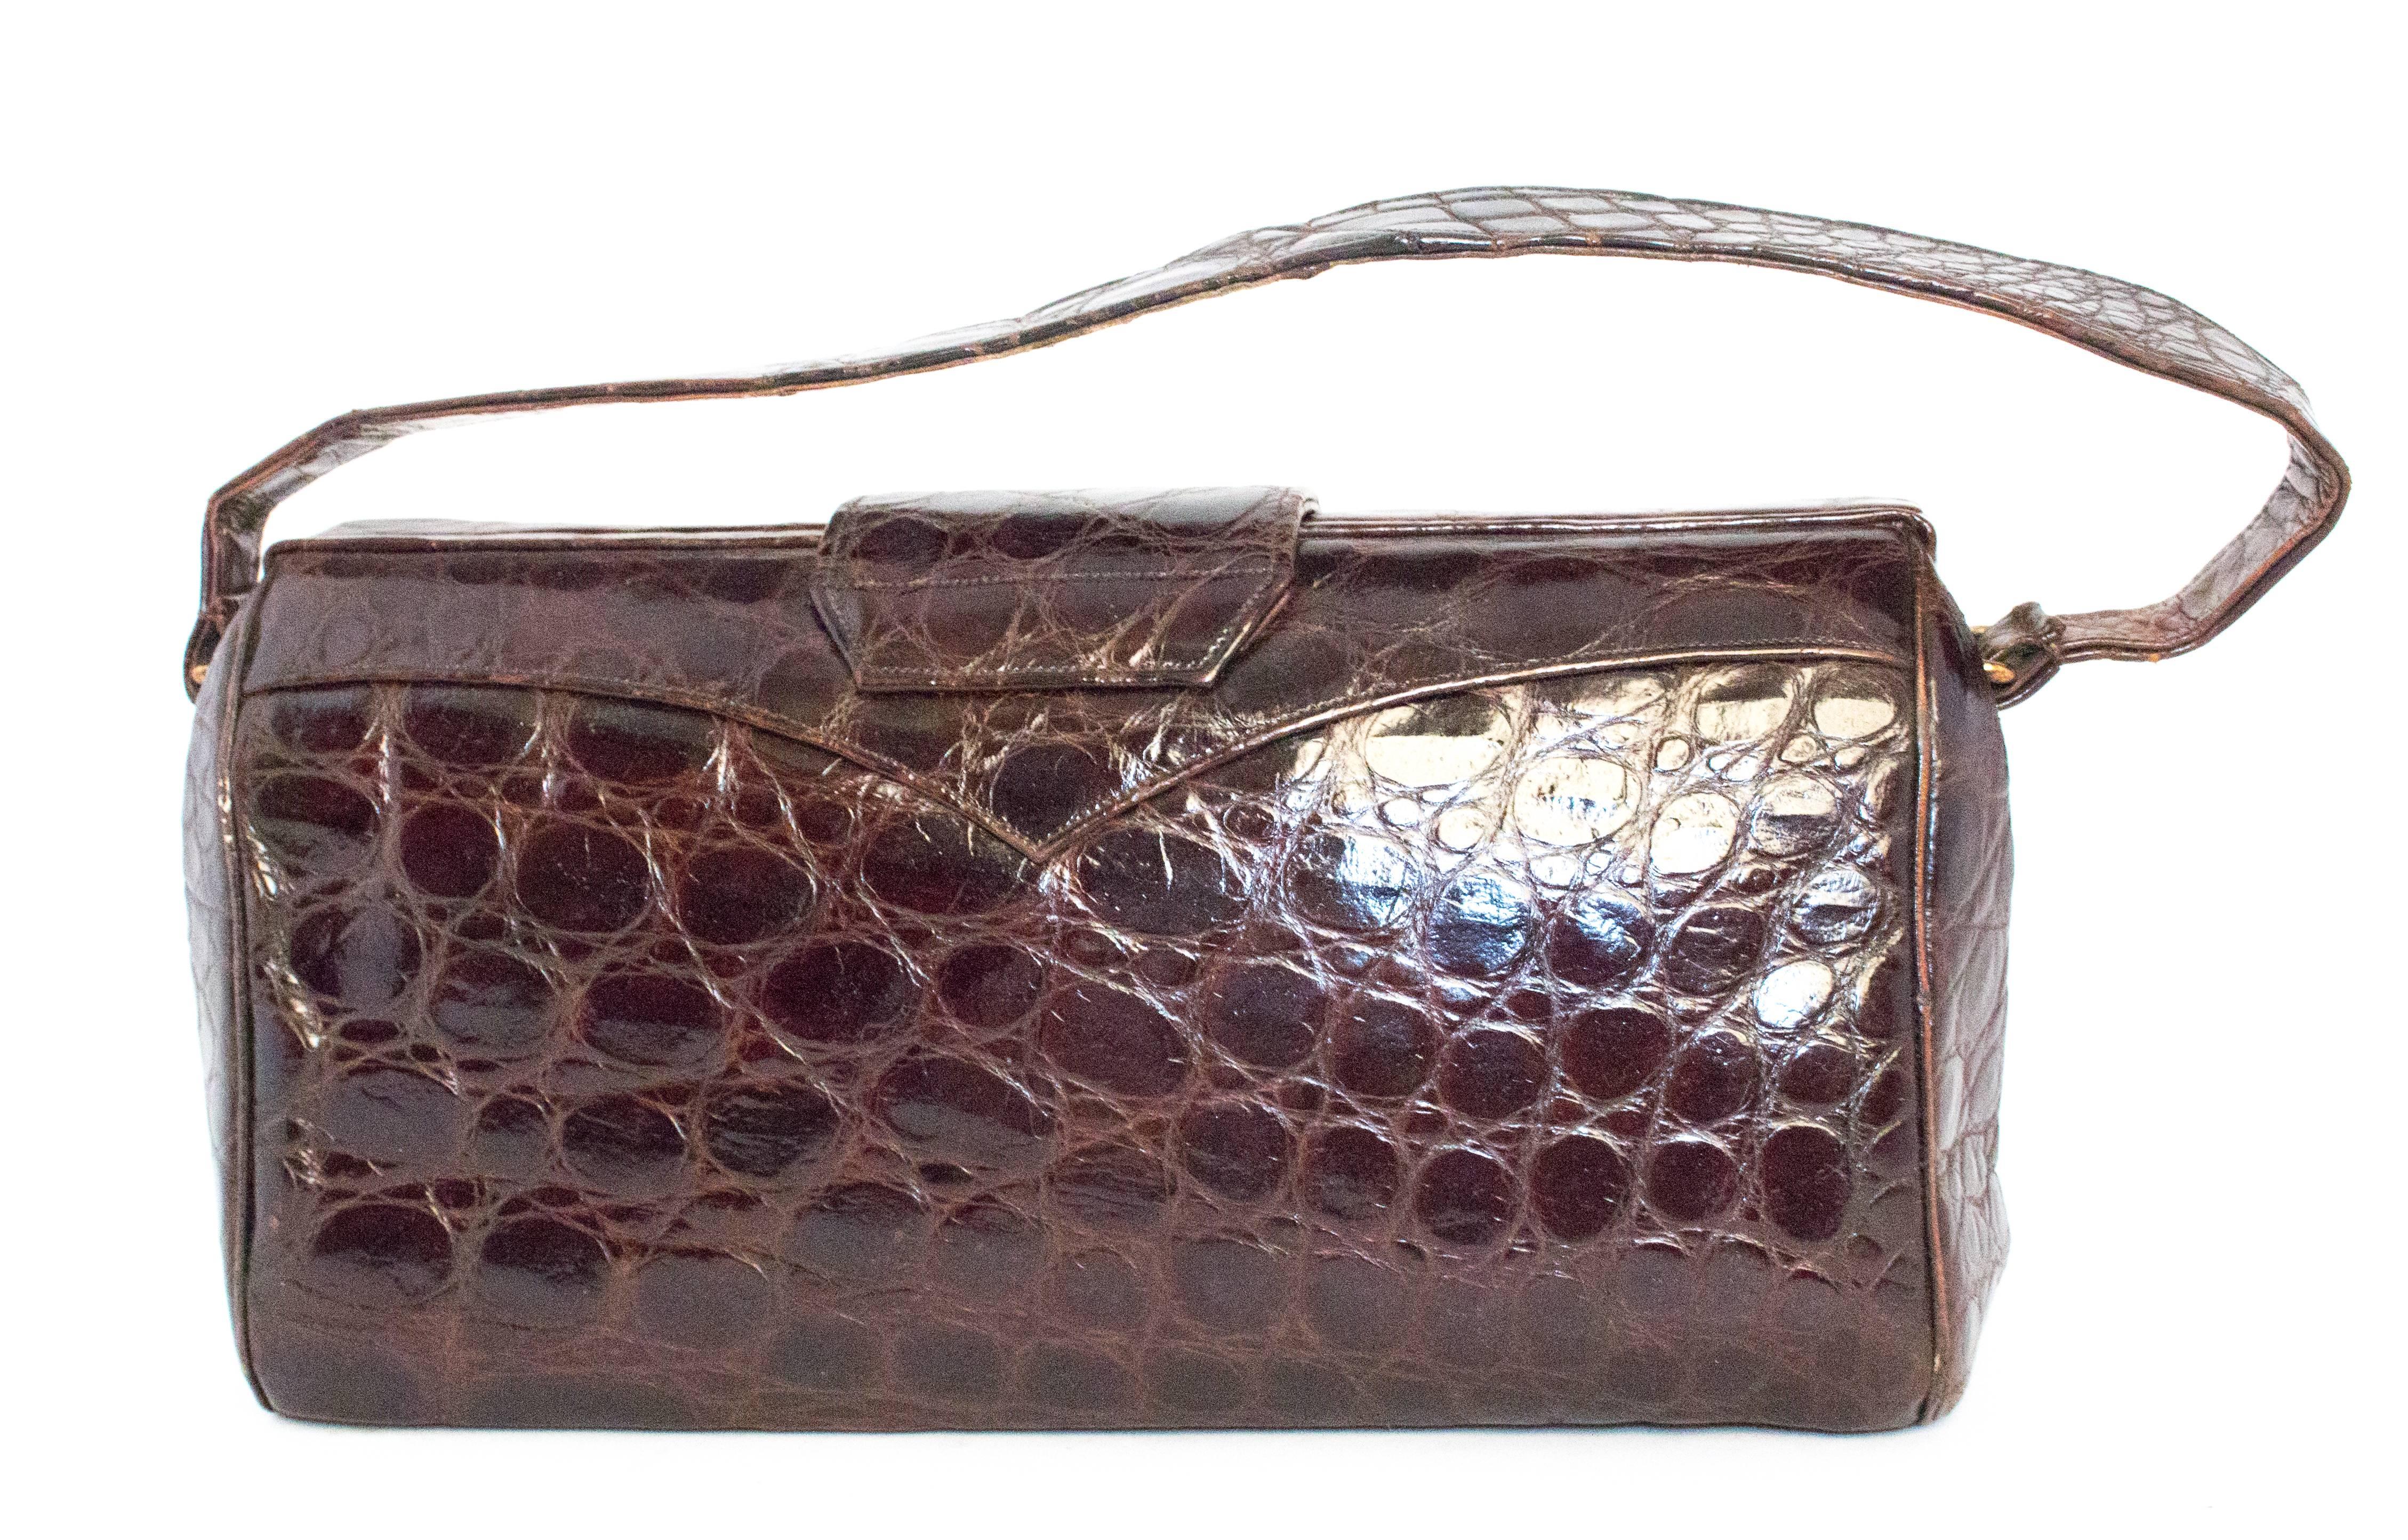 1940s alligator handbag. Opens from top, hinged gold tone hardware. Leather lining. Multiple side pockets. 

Strap: 17"
Purse height: 6"
Purse length: 9 1/2"
Purse width: 4" at base